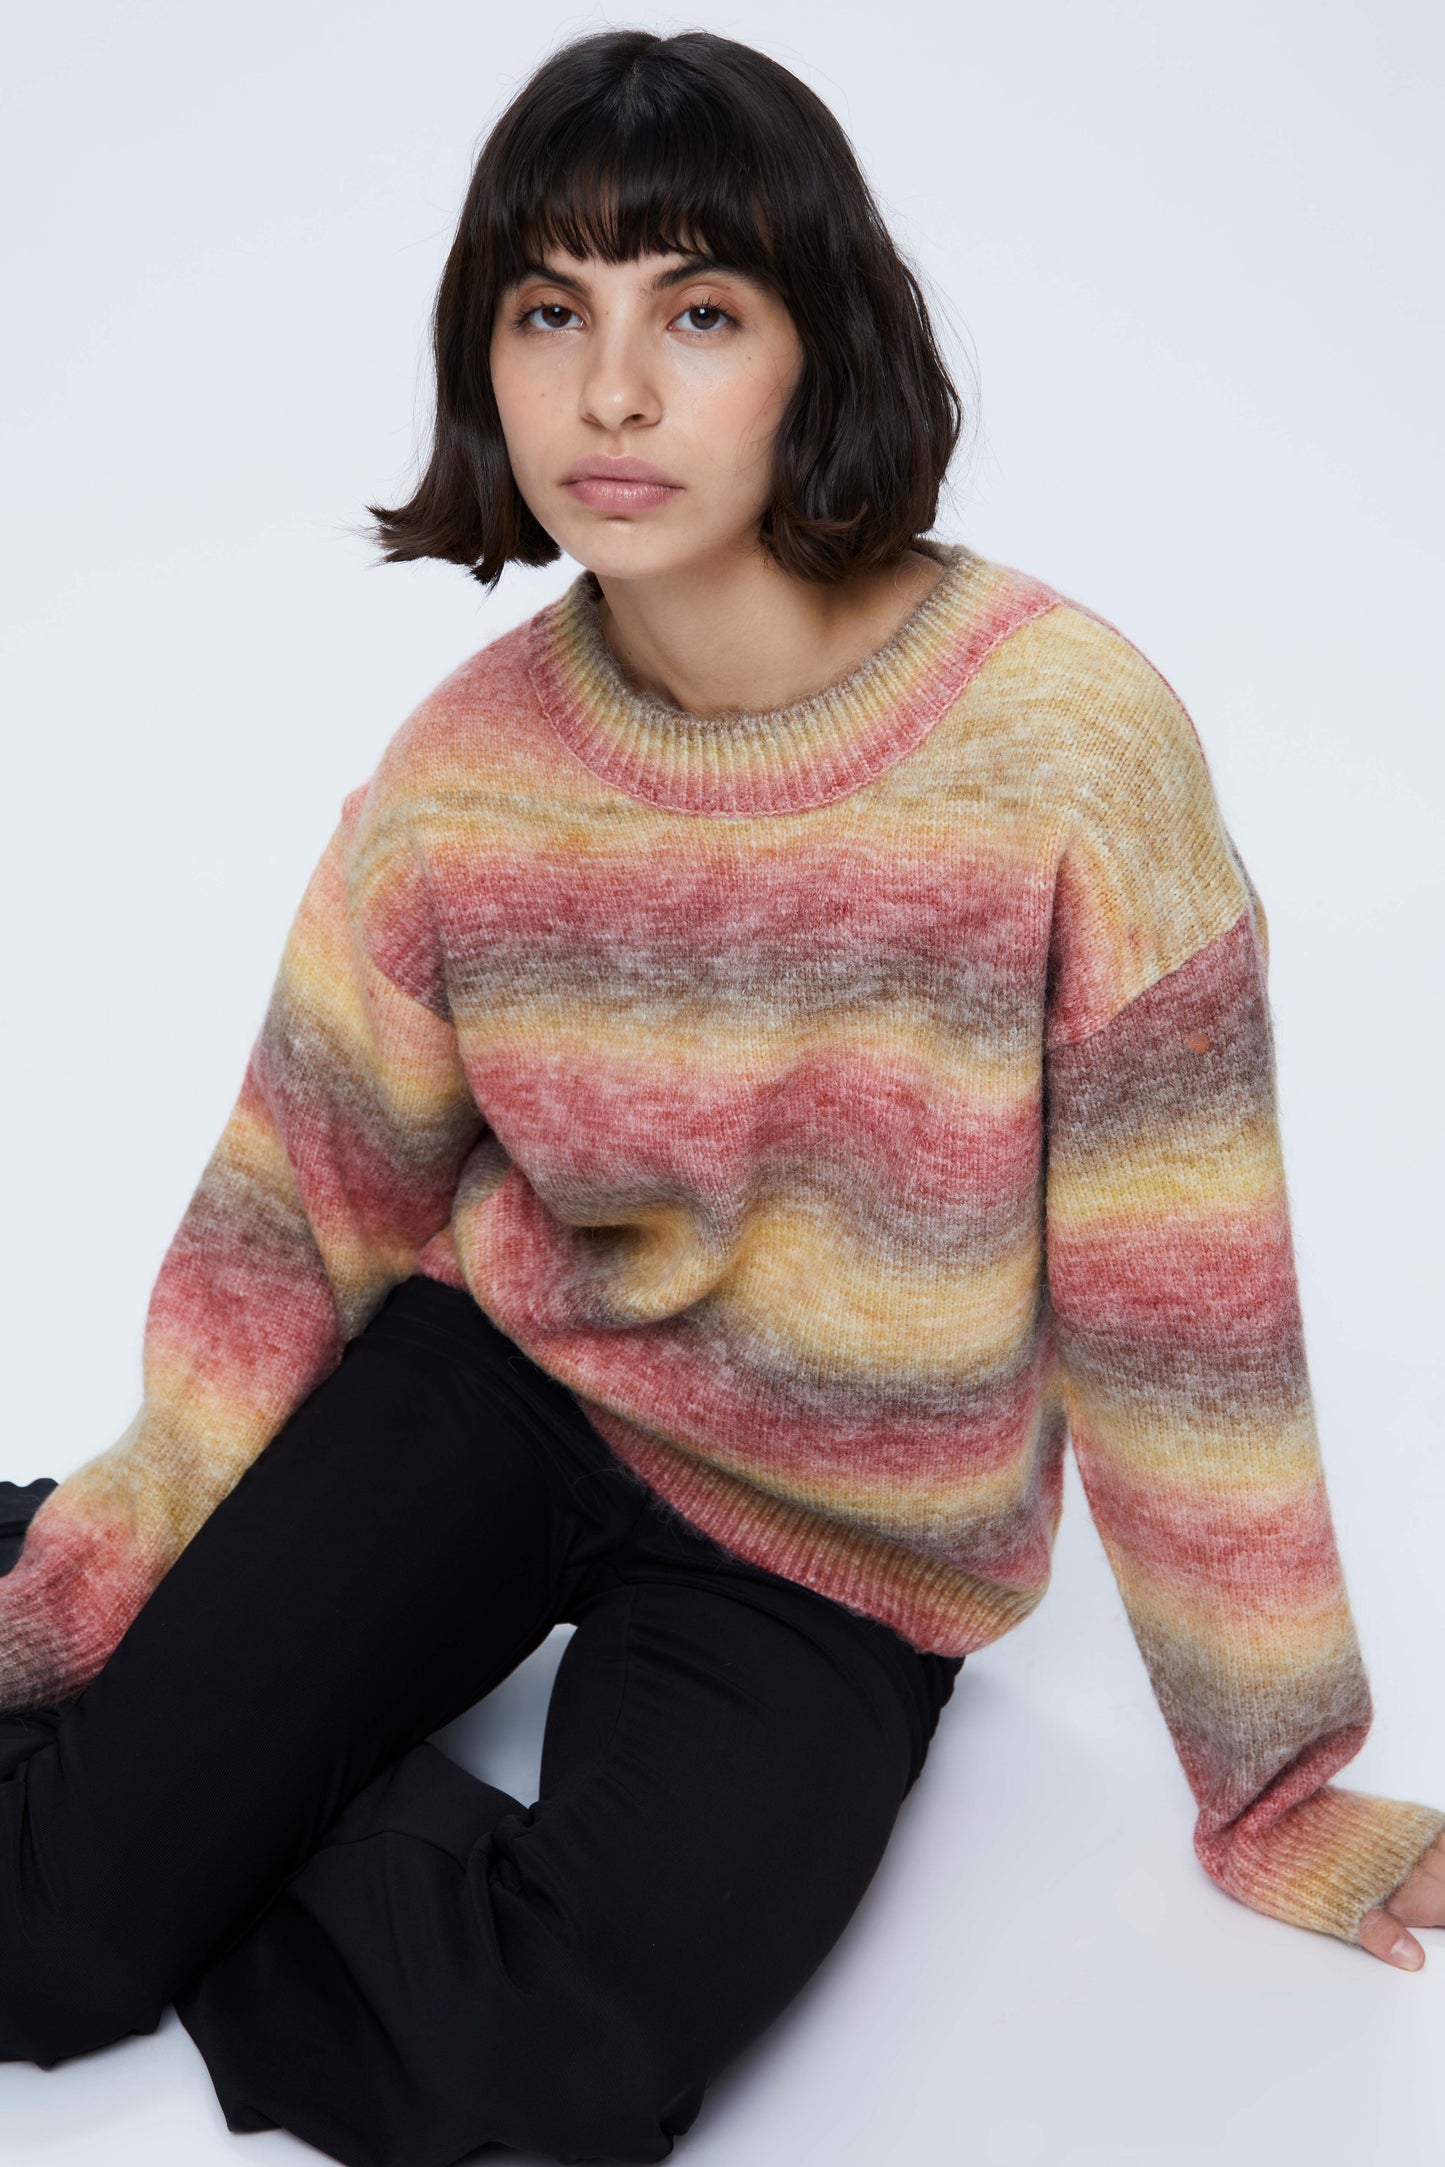 Textured knit sweater with multicolored stripes